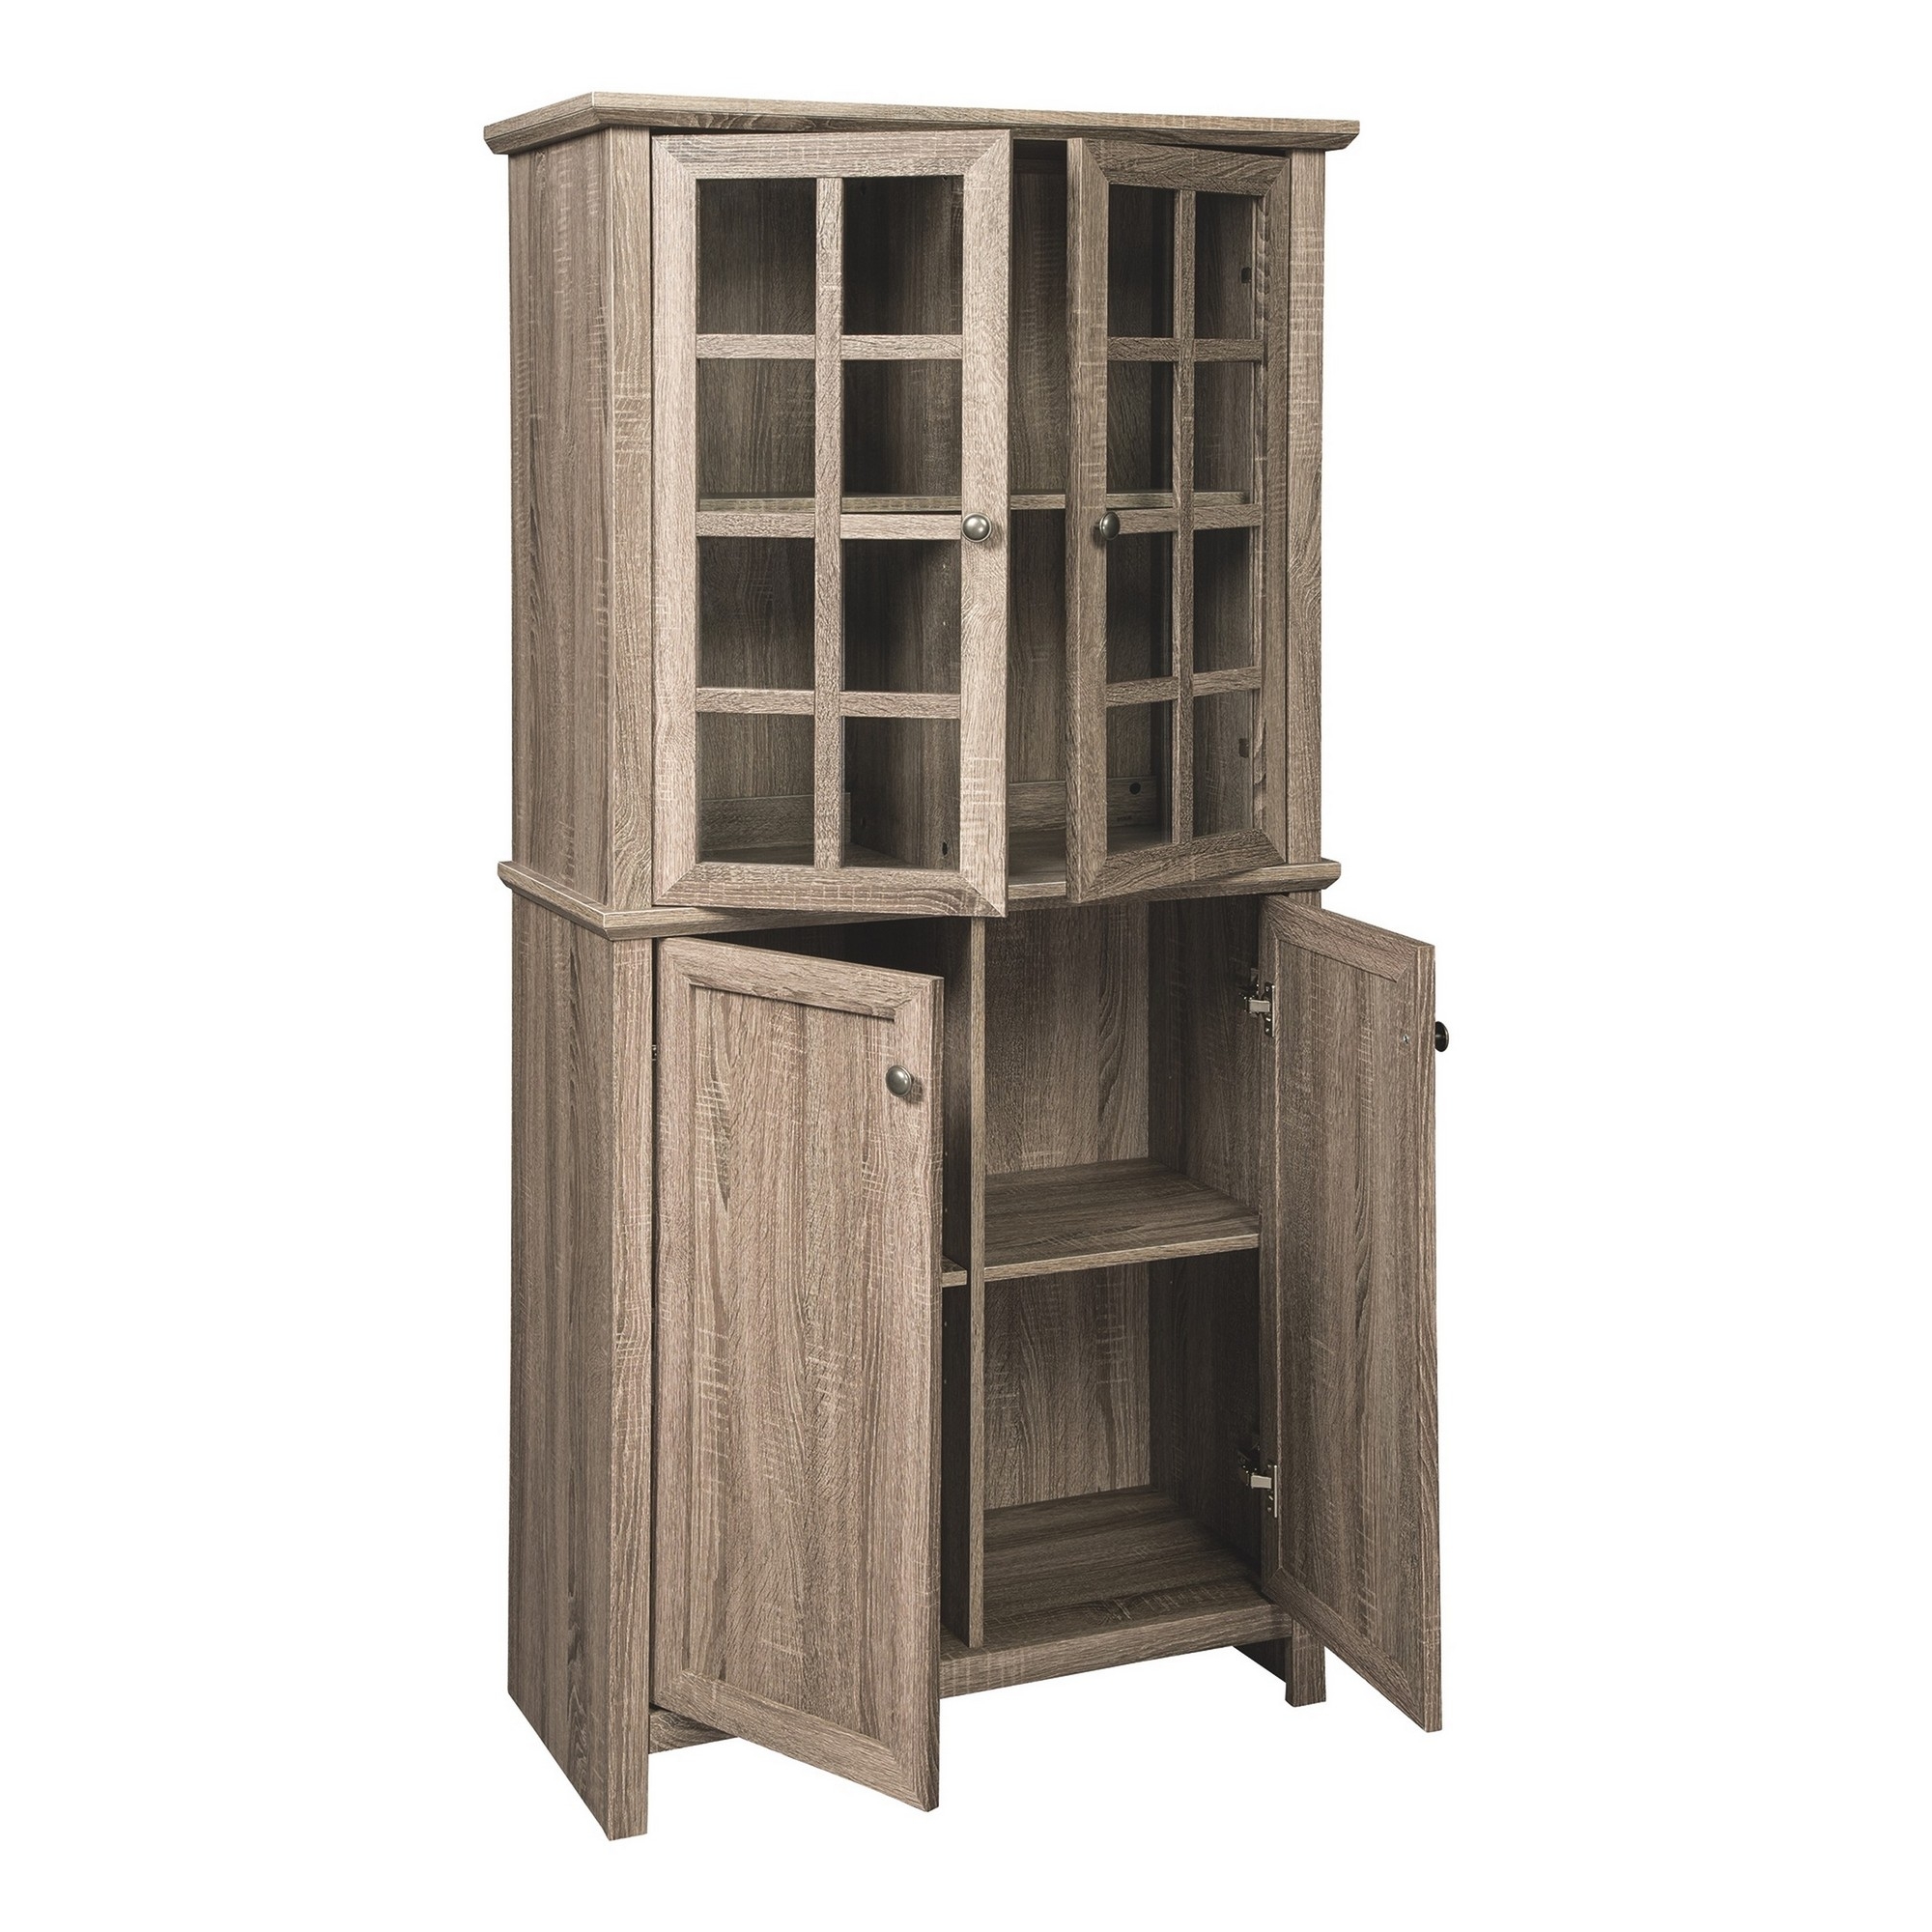 71 Inches 2 Glass Insert And 2 Closed Door Wooden Accent Cabinet, Brown- Saltoro Sherpi